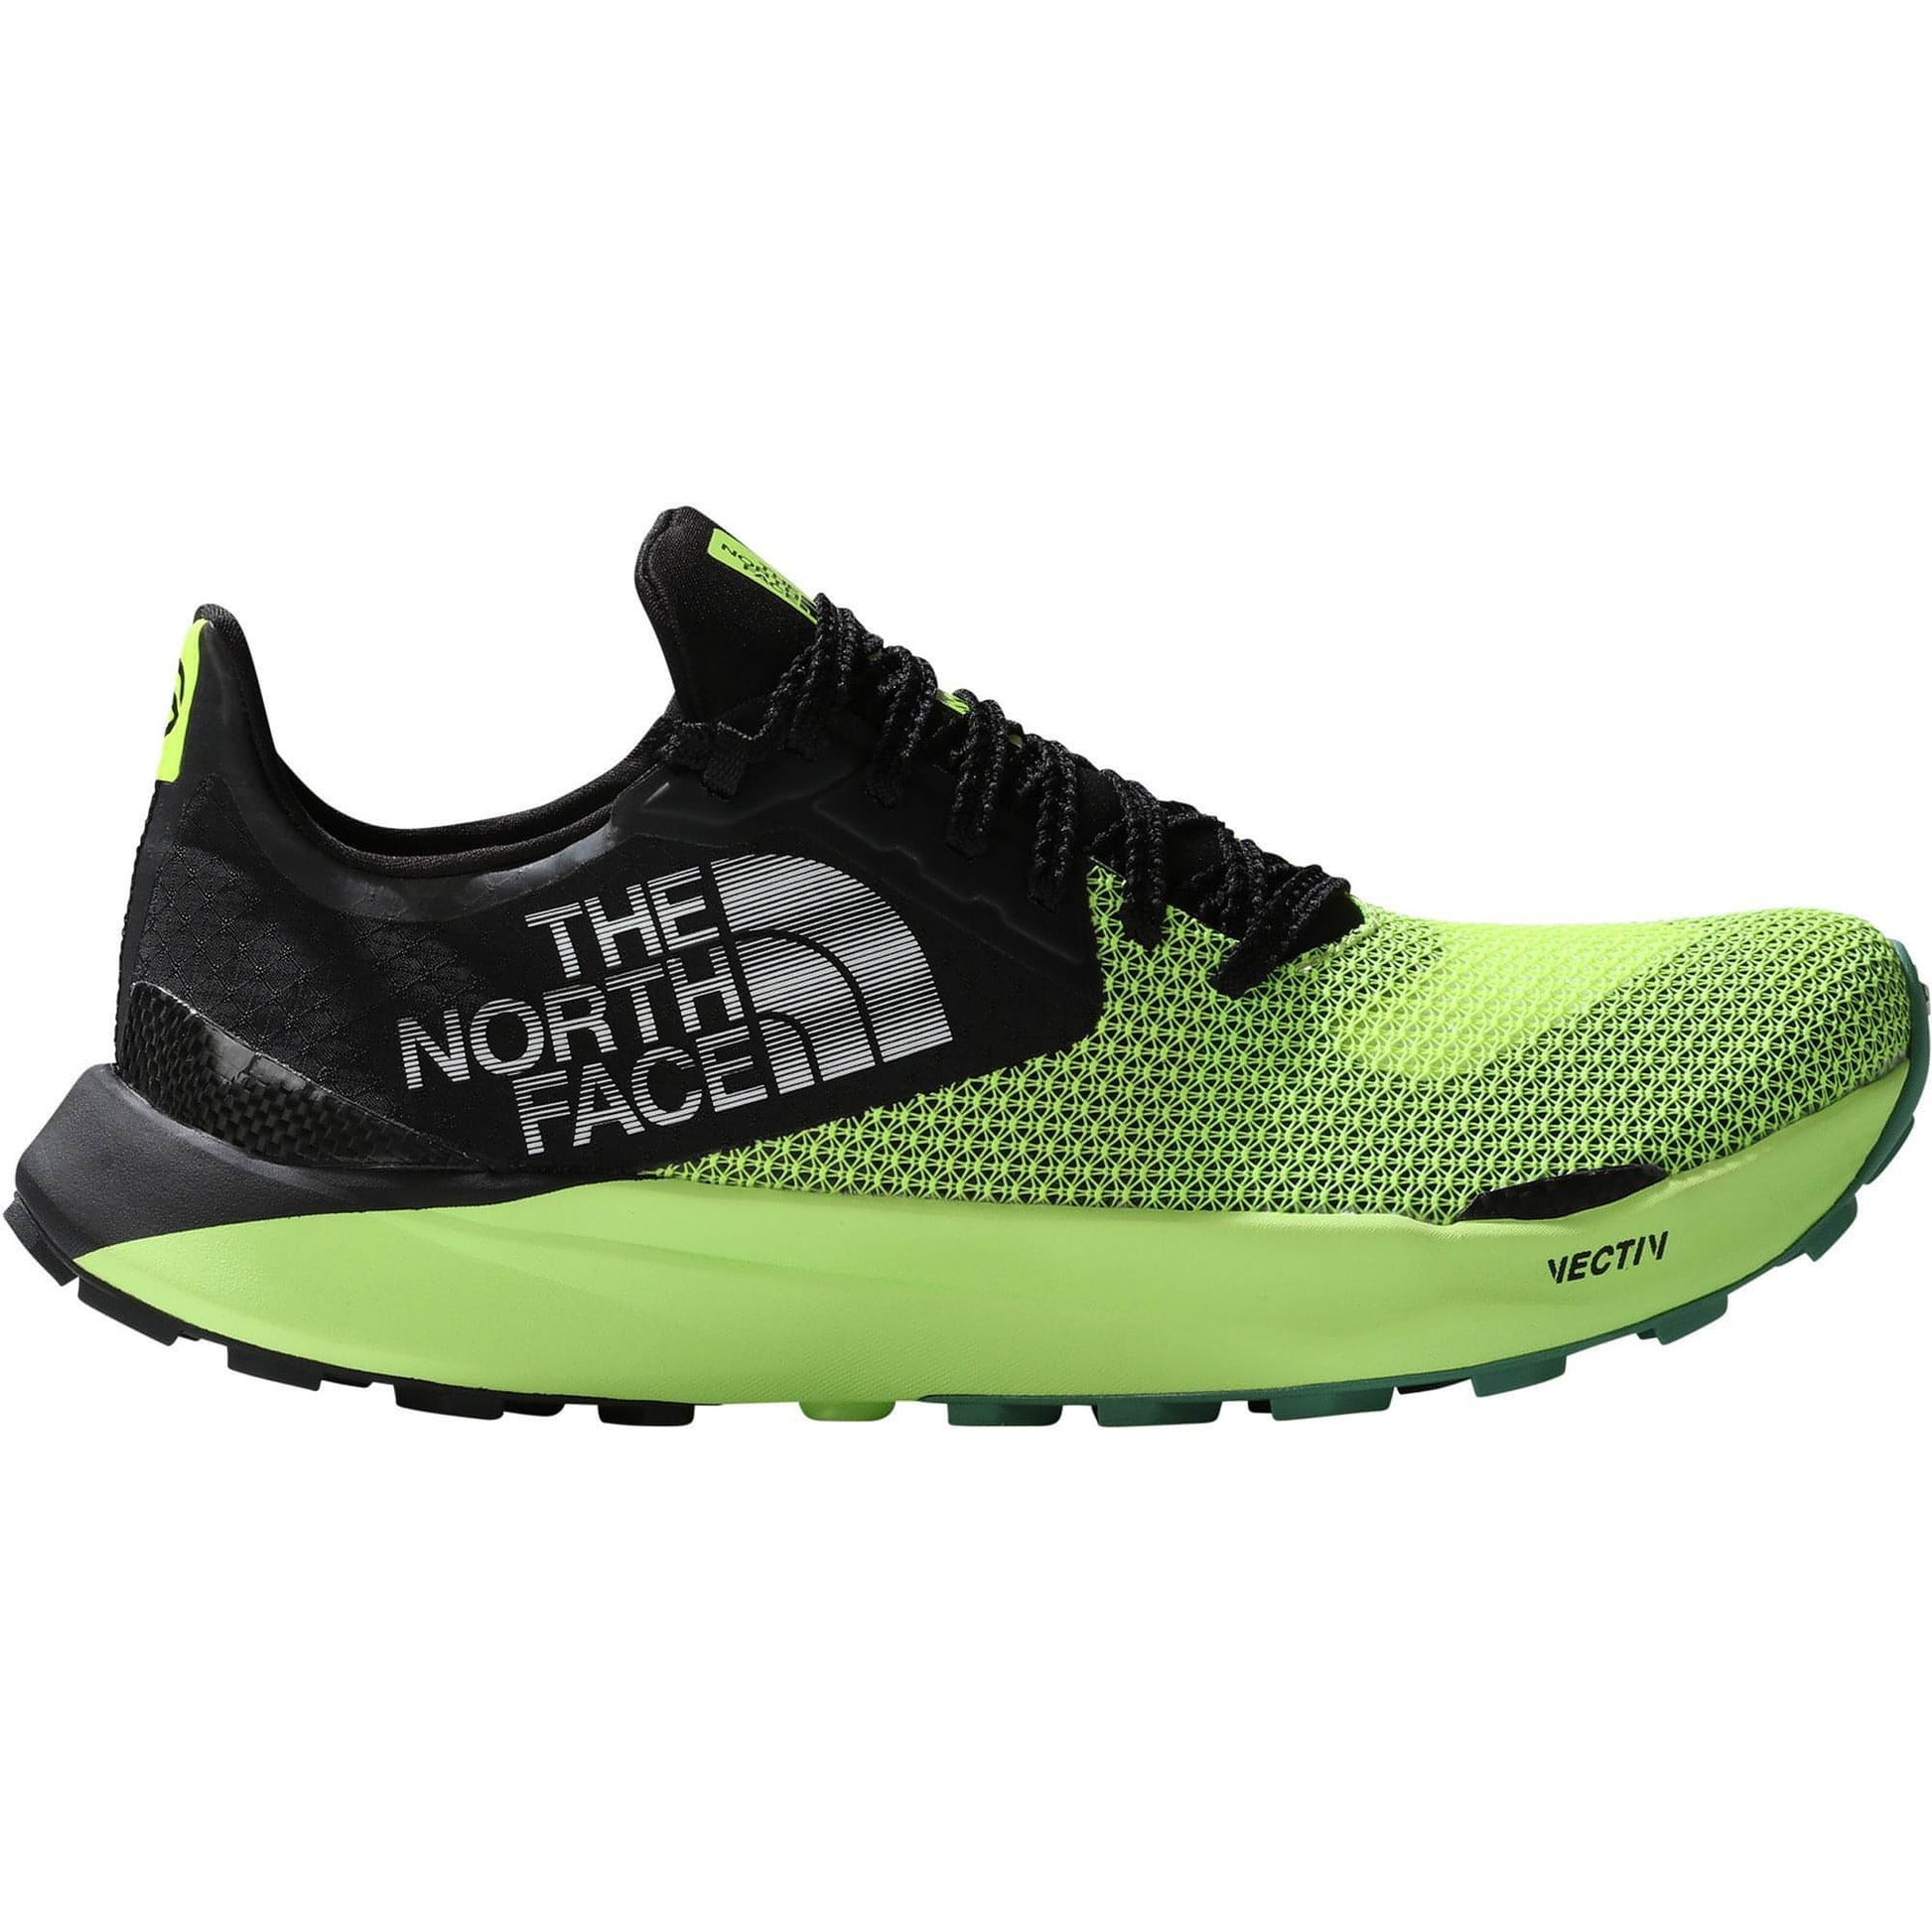 The North Face Summit Vectiv Sky Nf0A7W5Kfm91